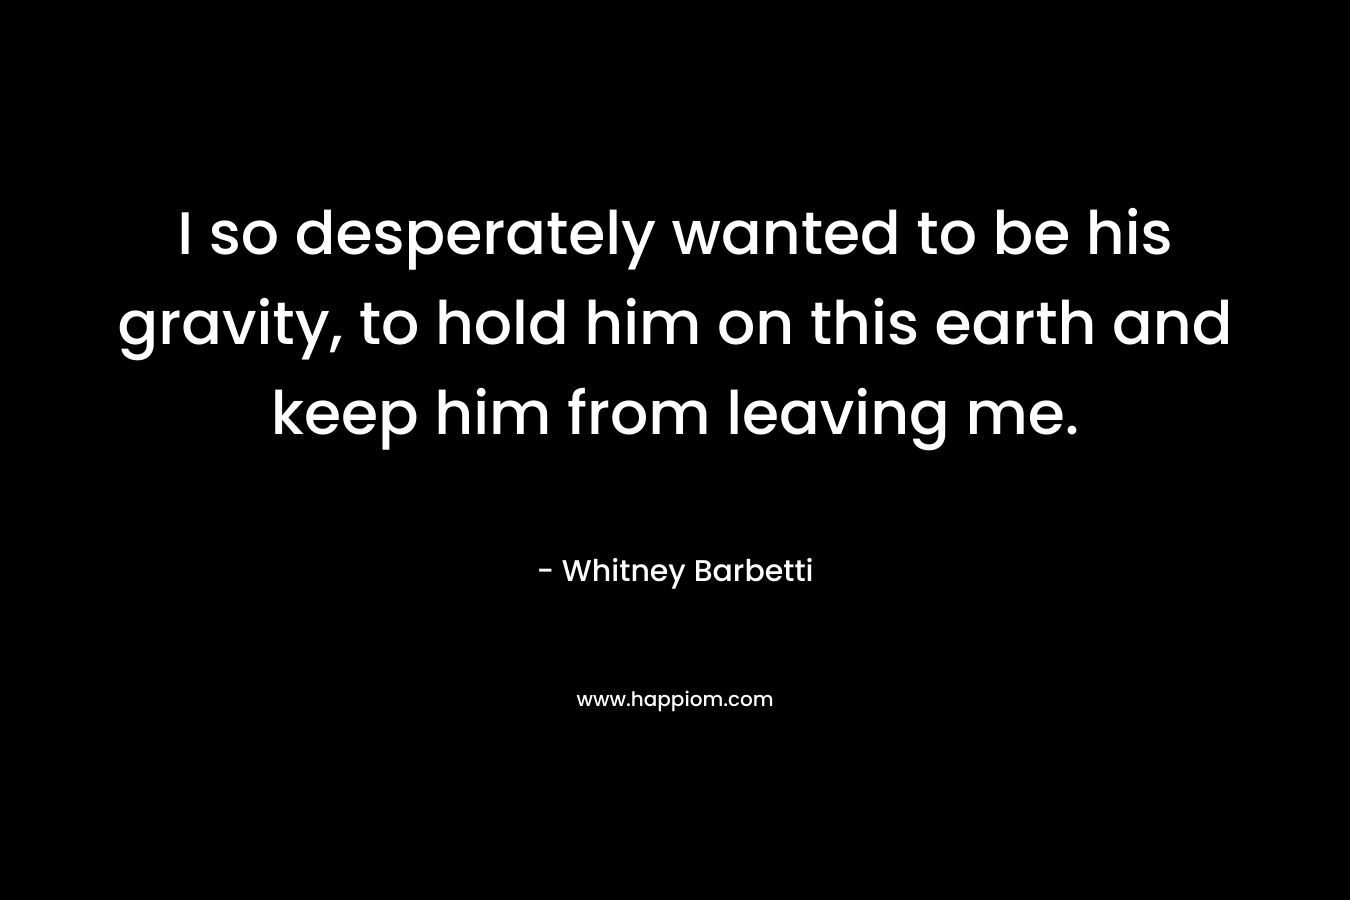 I so desperately wanted to be his gravity, to hold him on this earth and keep him from leaving me.